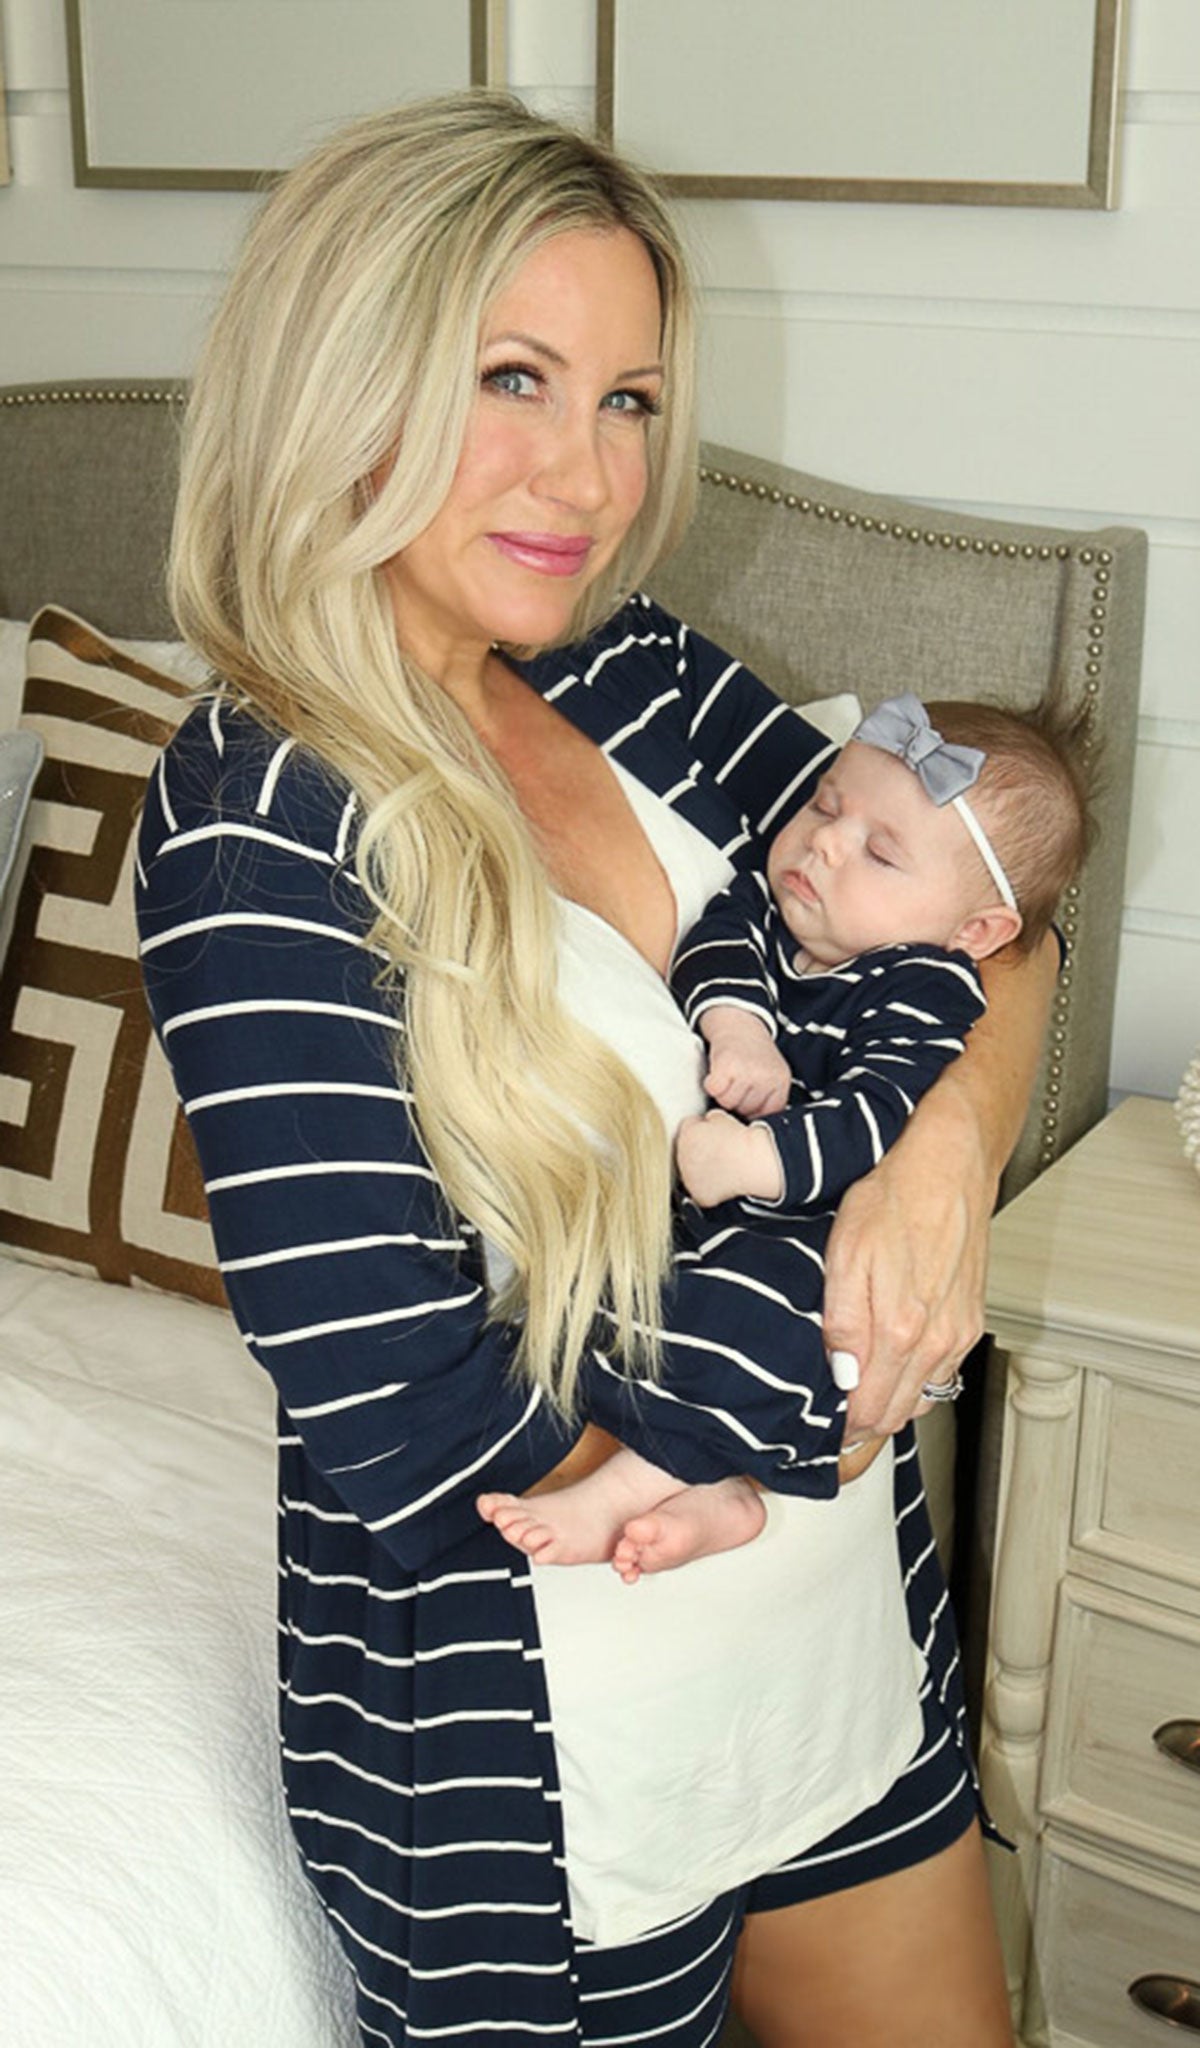 Baby's Welcome Home 3 Piece Set - Navy. Baby wearing baby gown while being held by her mom in matching PJs.